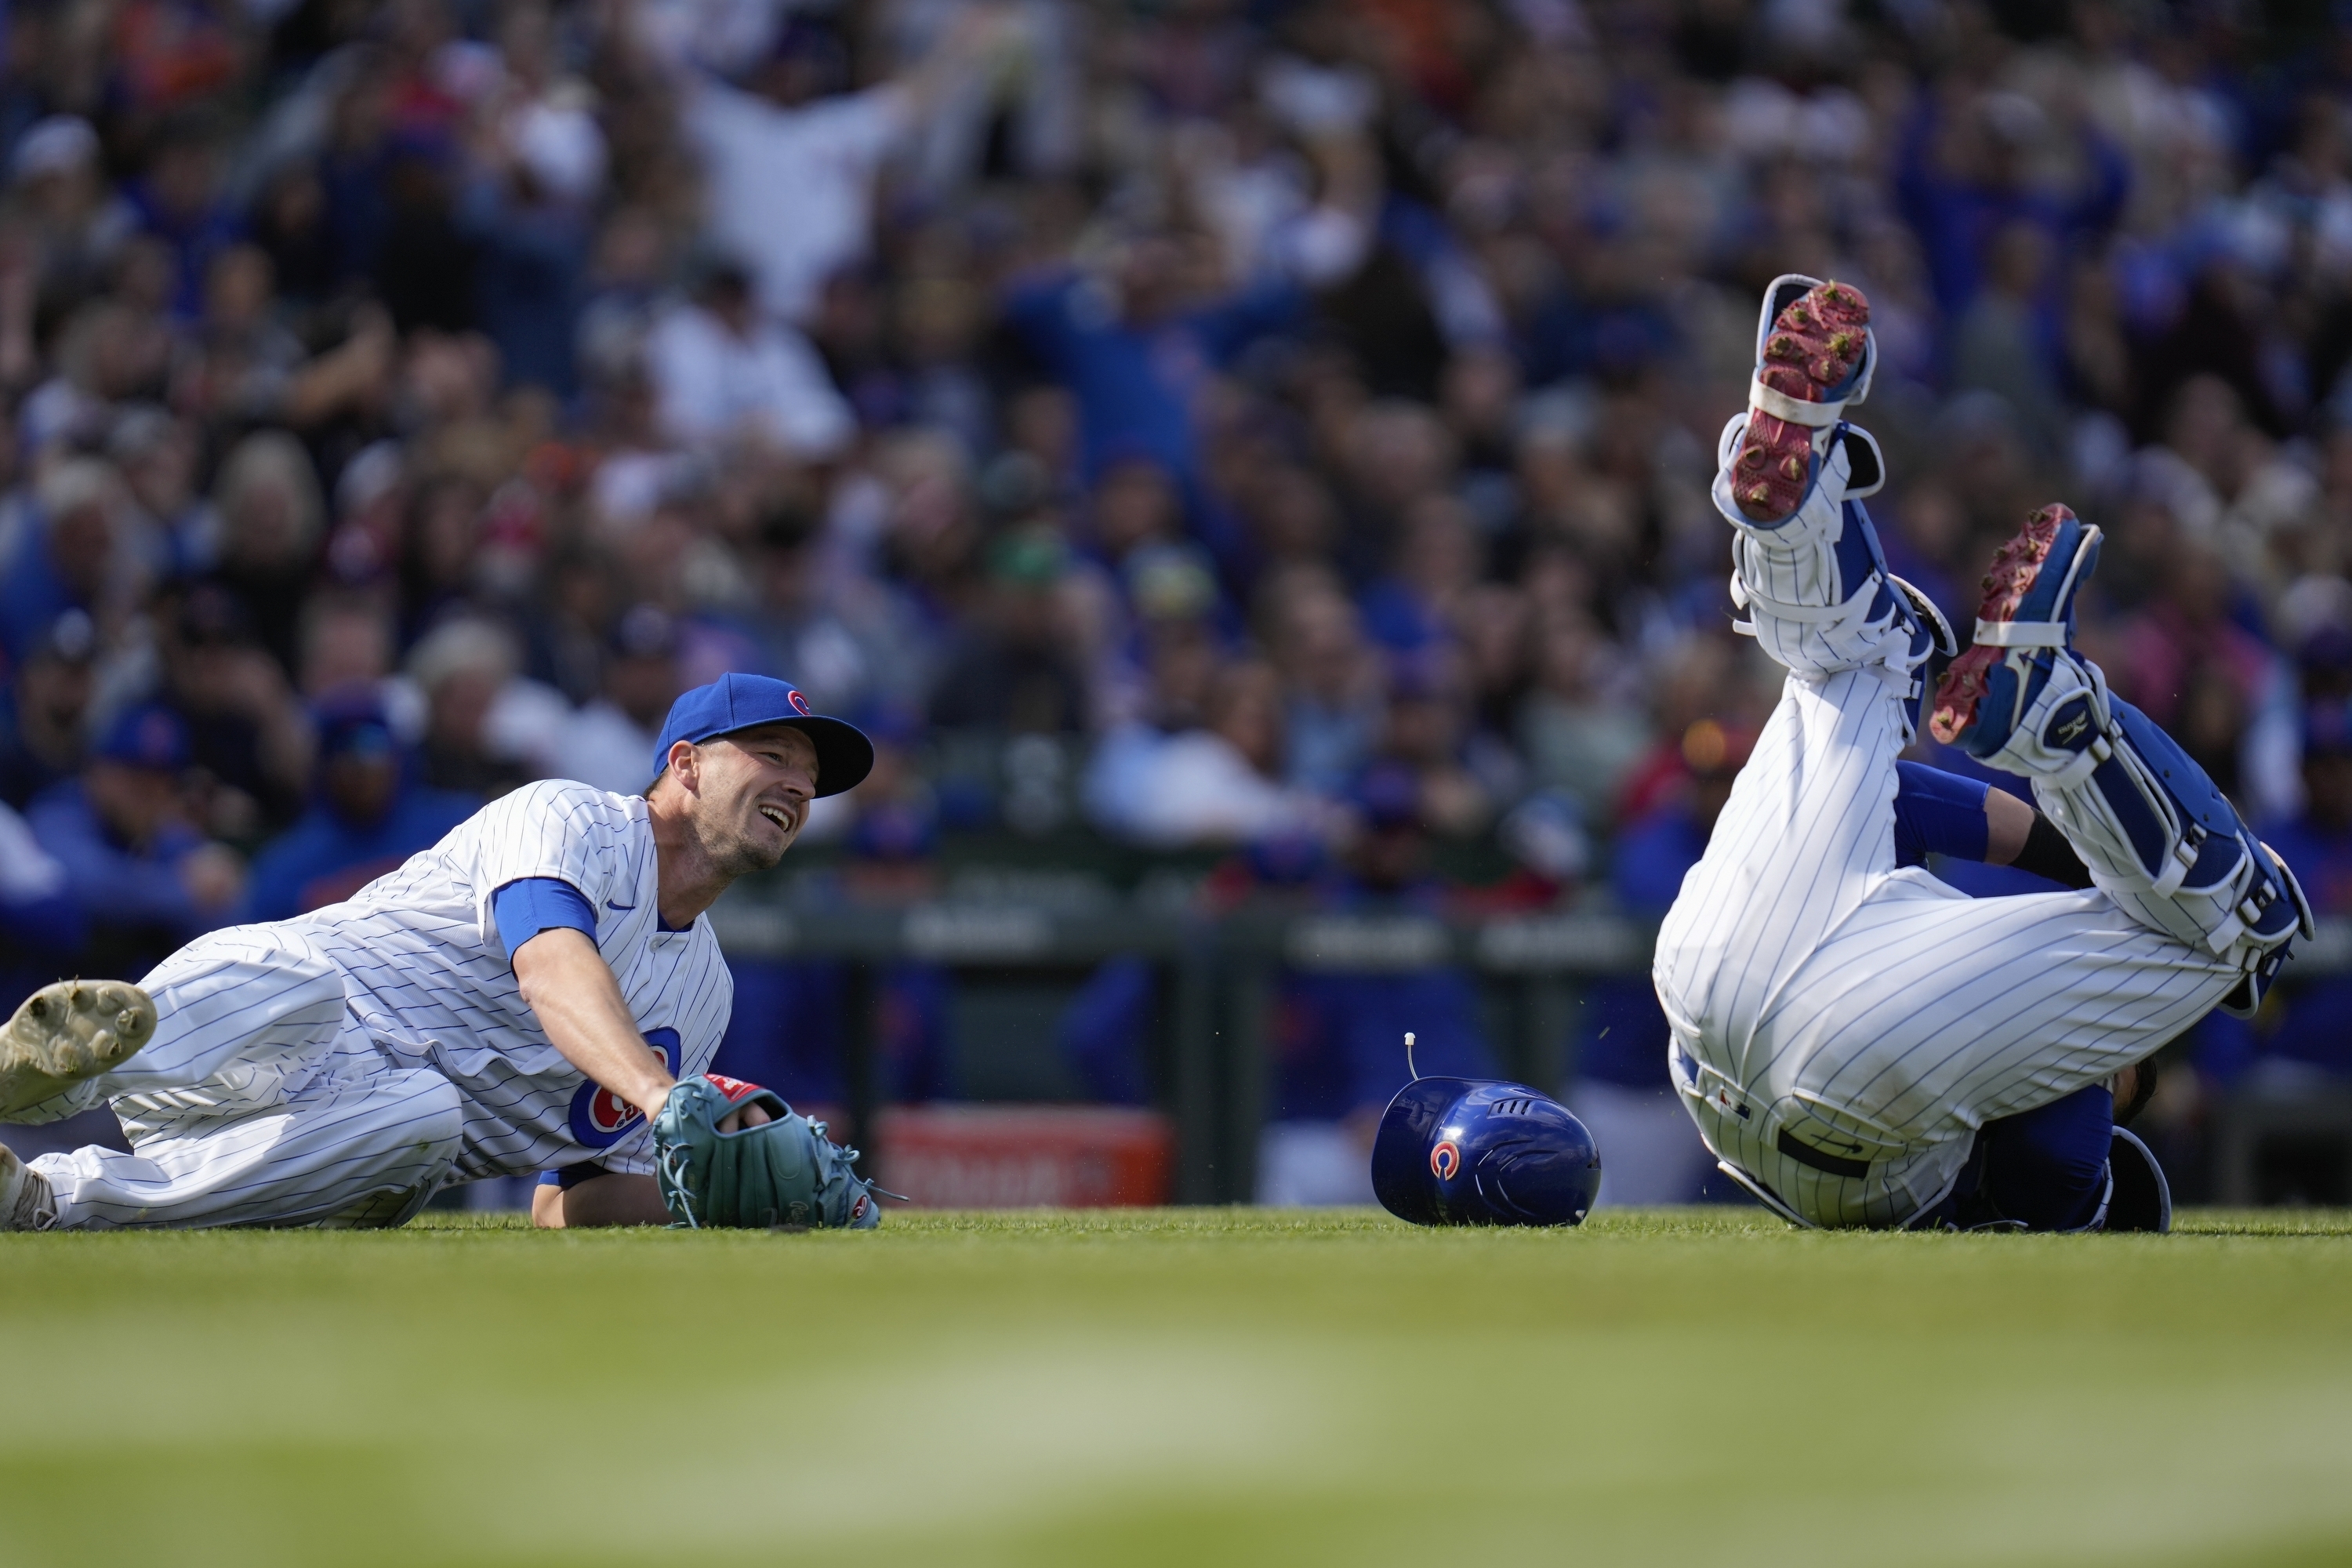 Cubs' Smyly flirts with perfect game